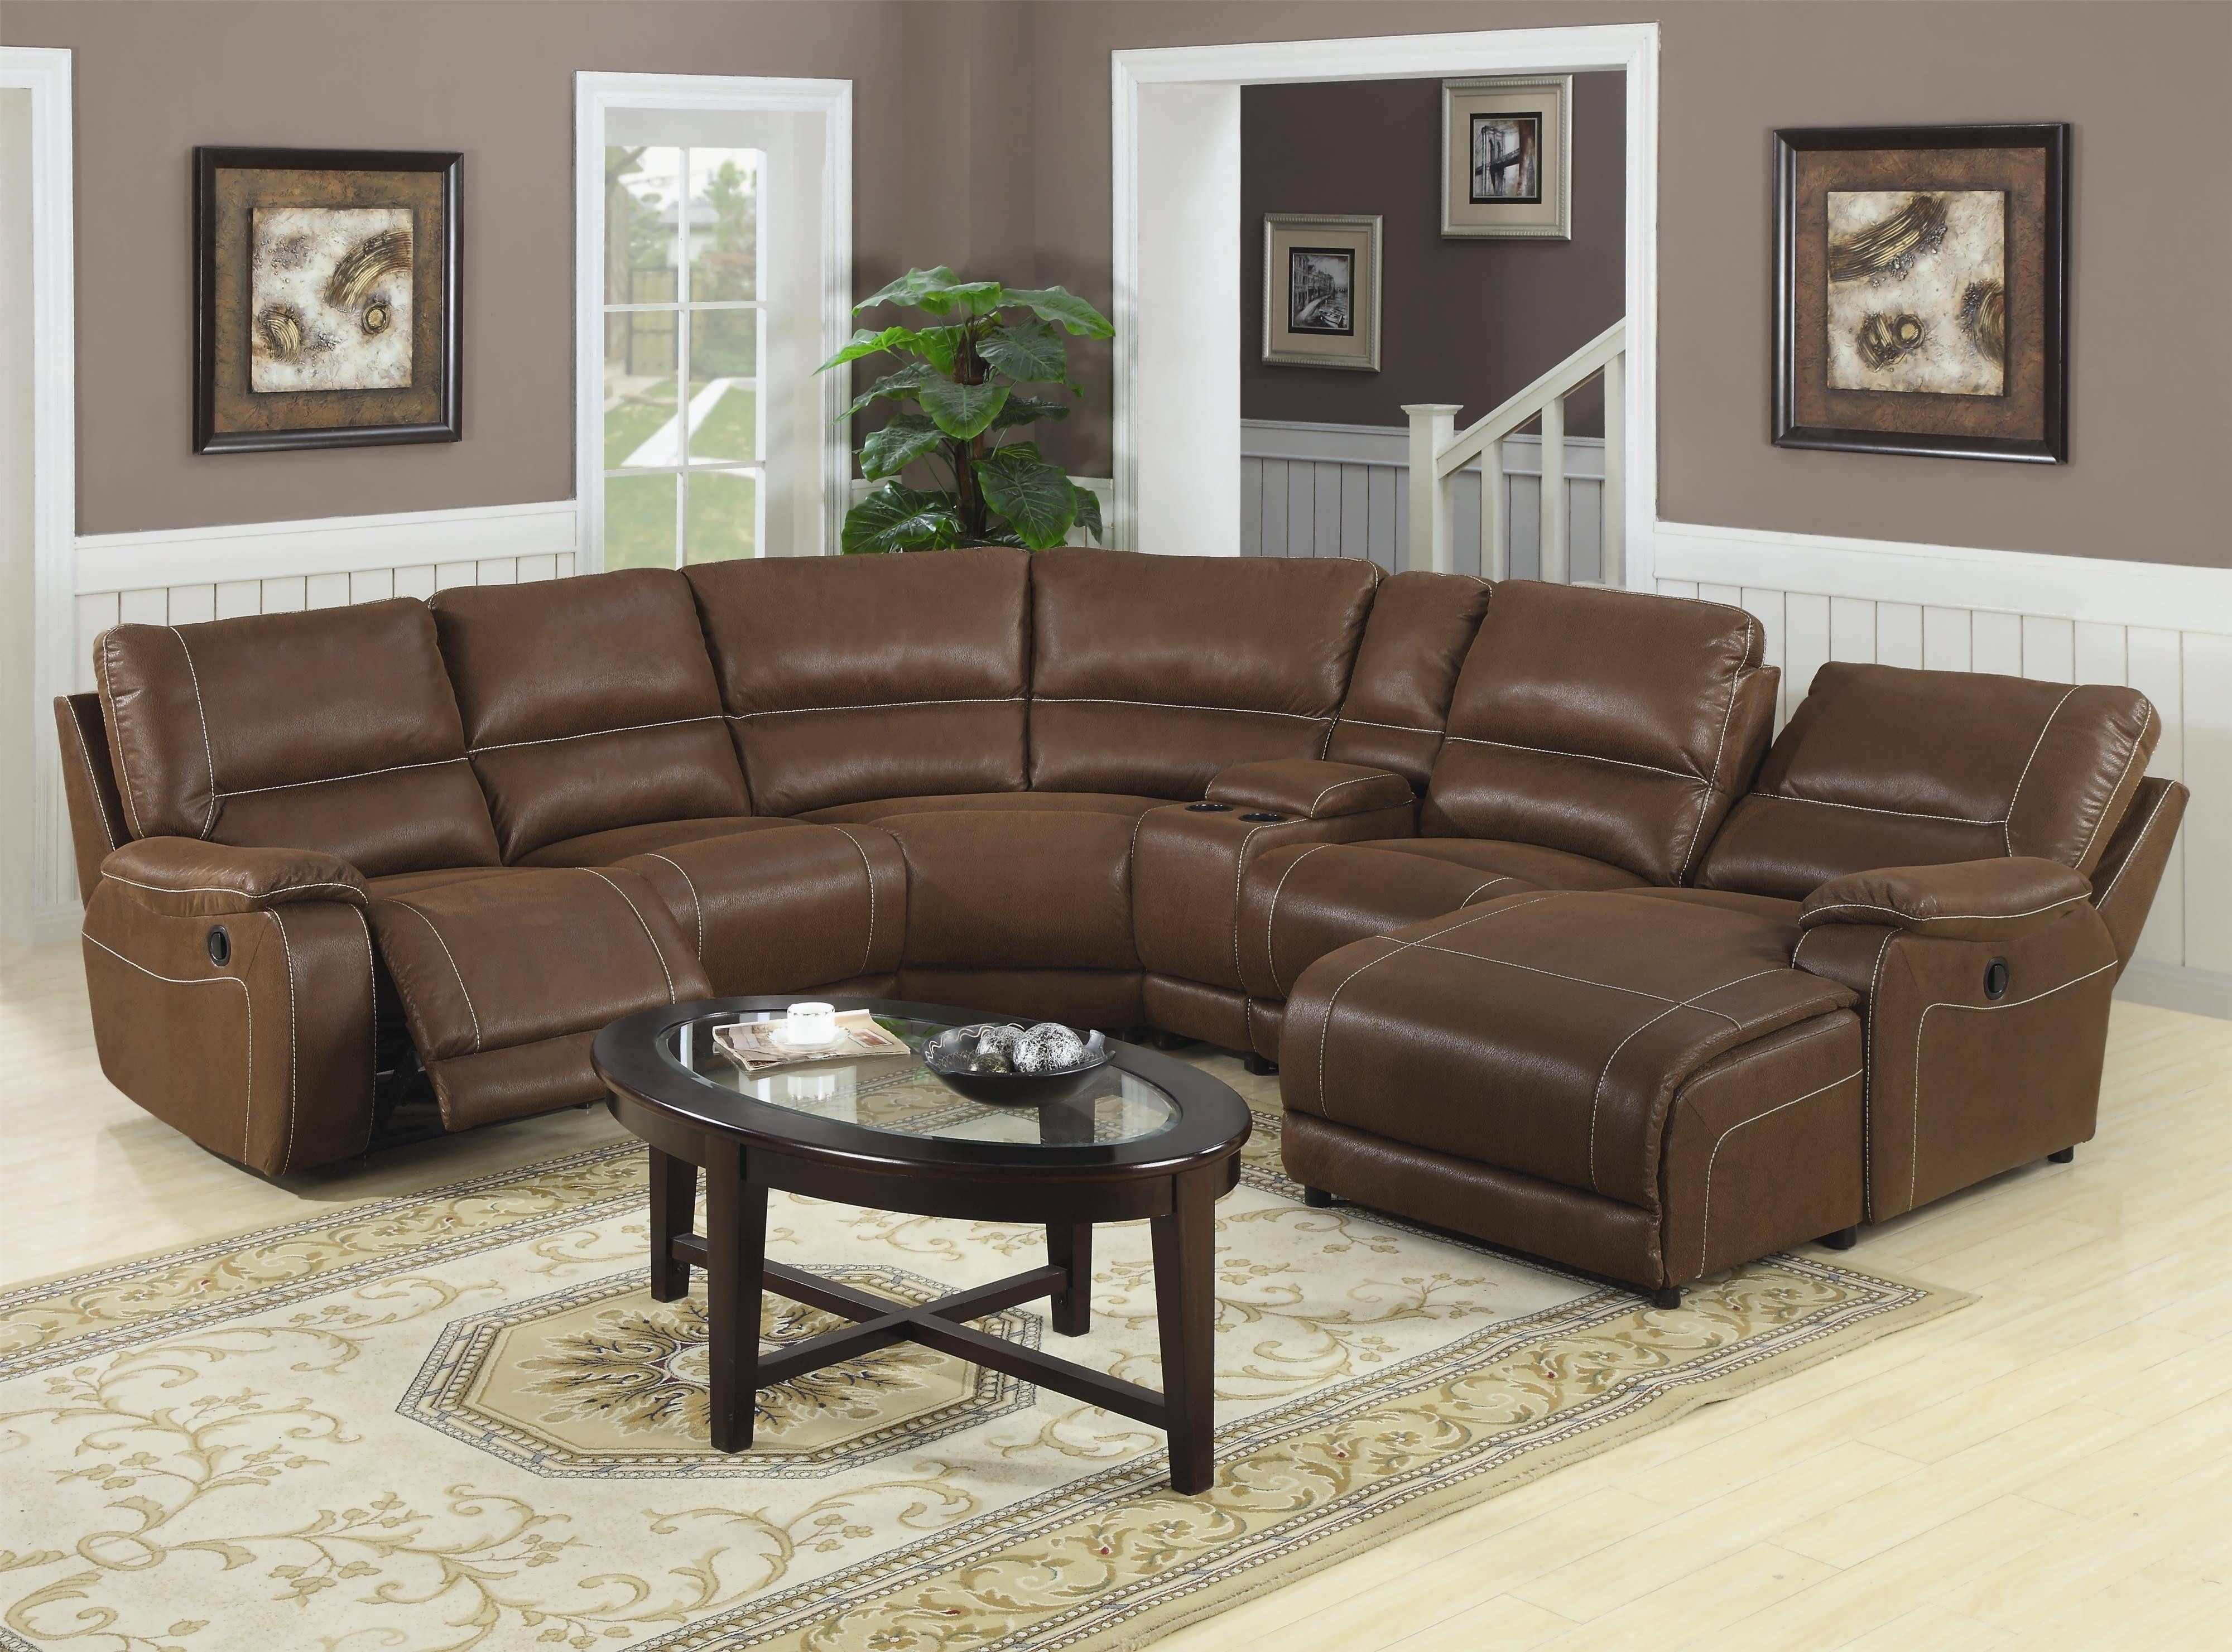 Sofa : White Sectional Sofa Black Leather Sectional Curved Within Curved Sectional Sofas With Recliner (View 4 of 15)